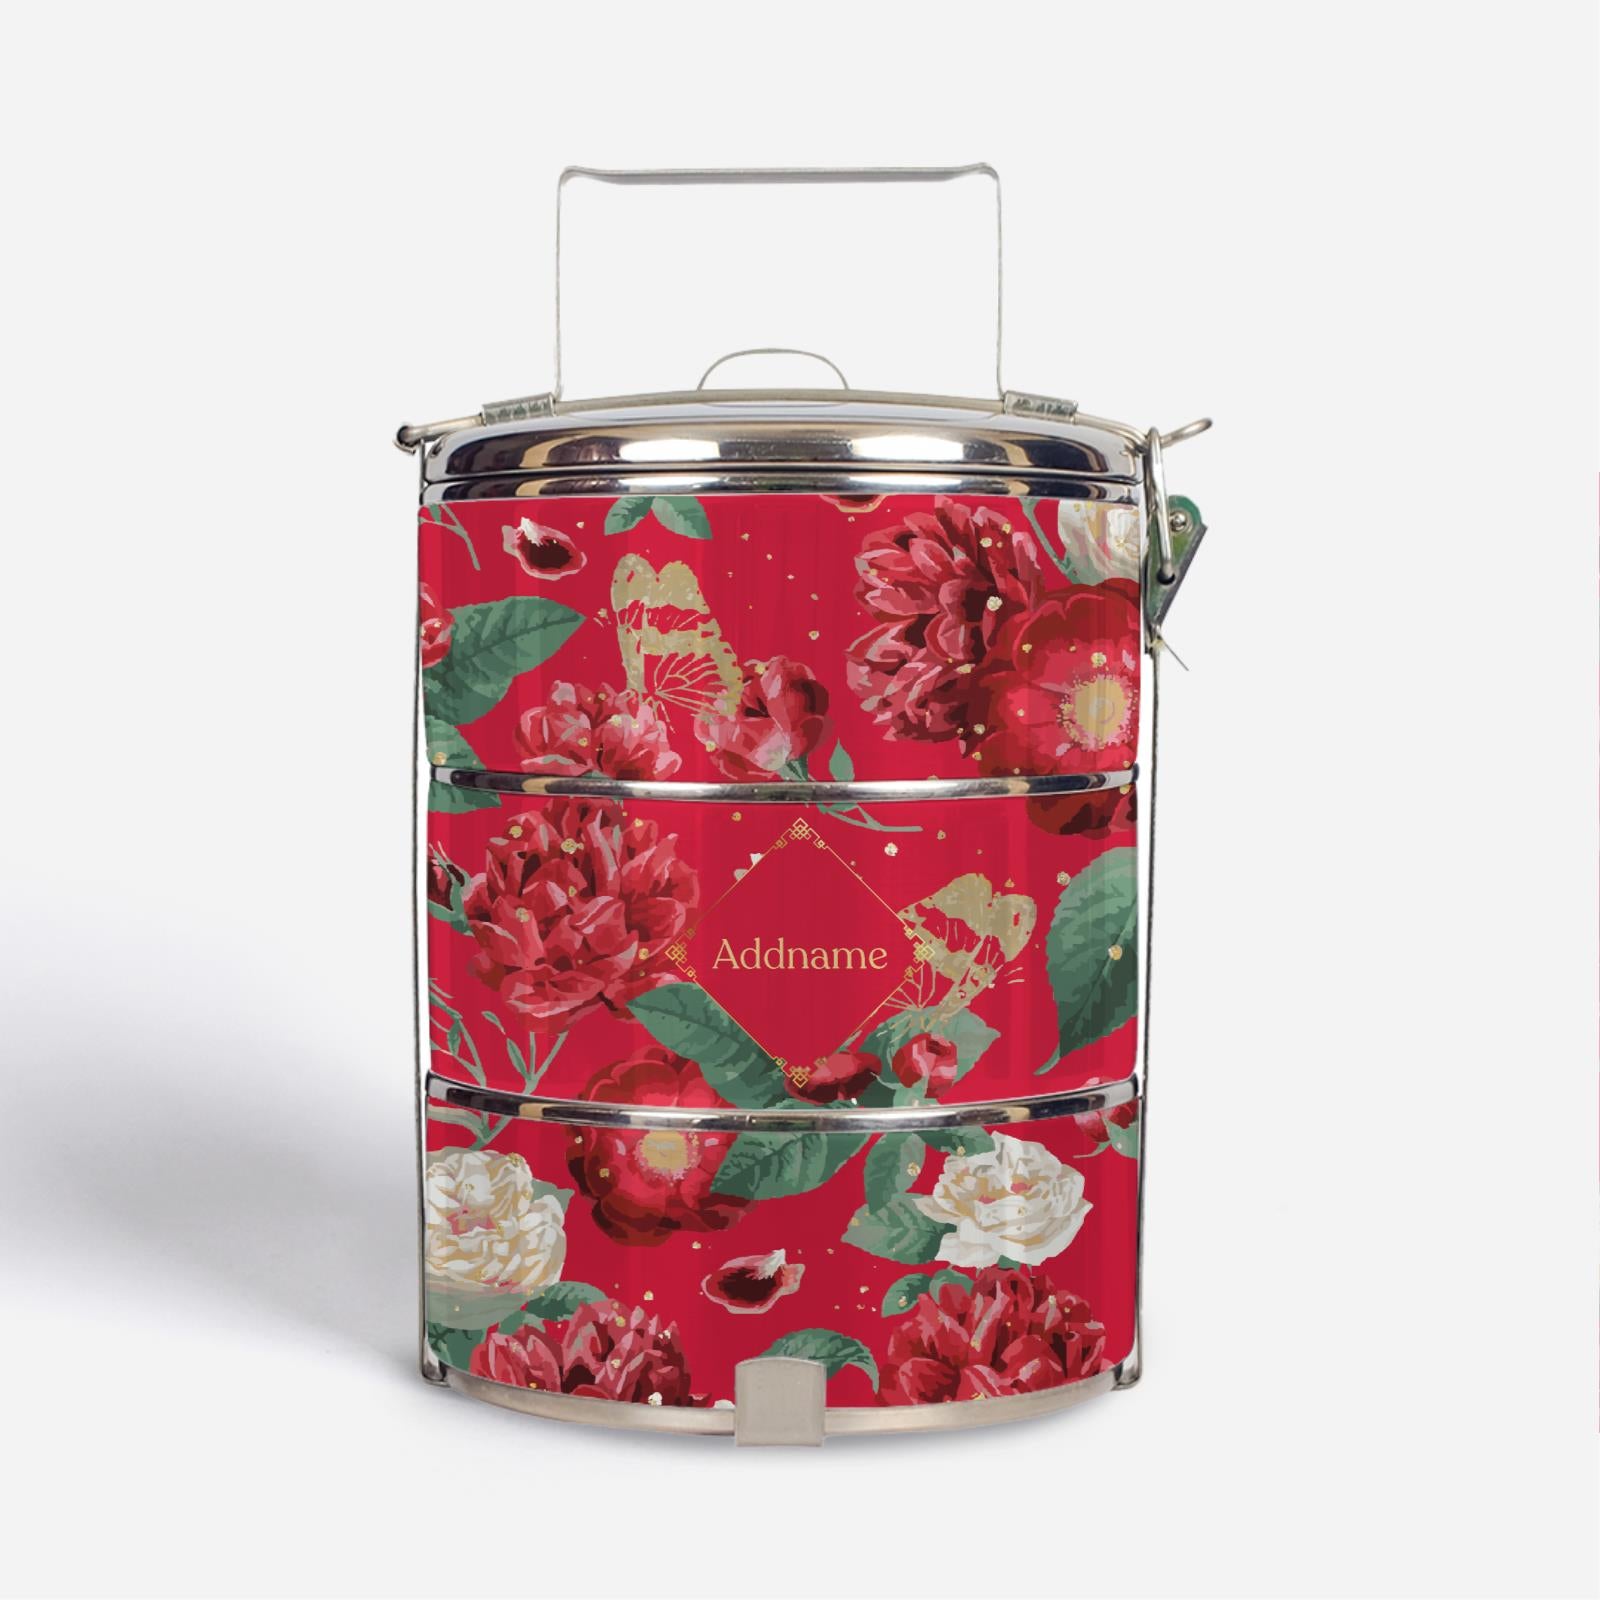 Royal Floral Series With English Personalization Standard Tiffin Carrier - Scorching Passion